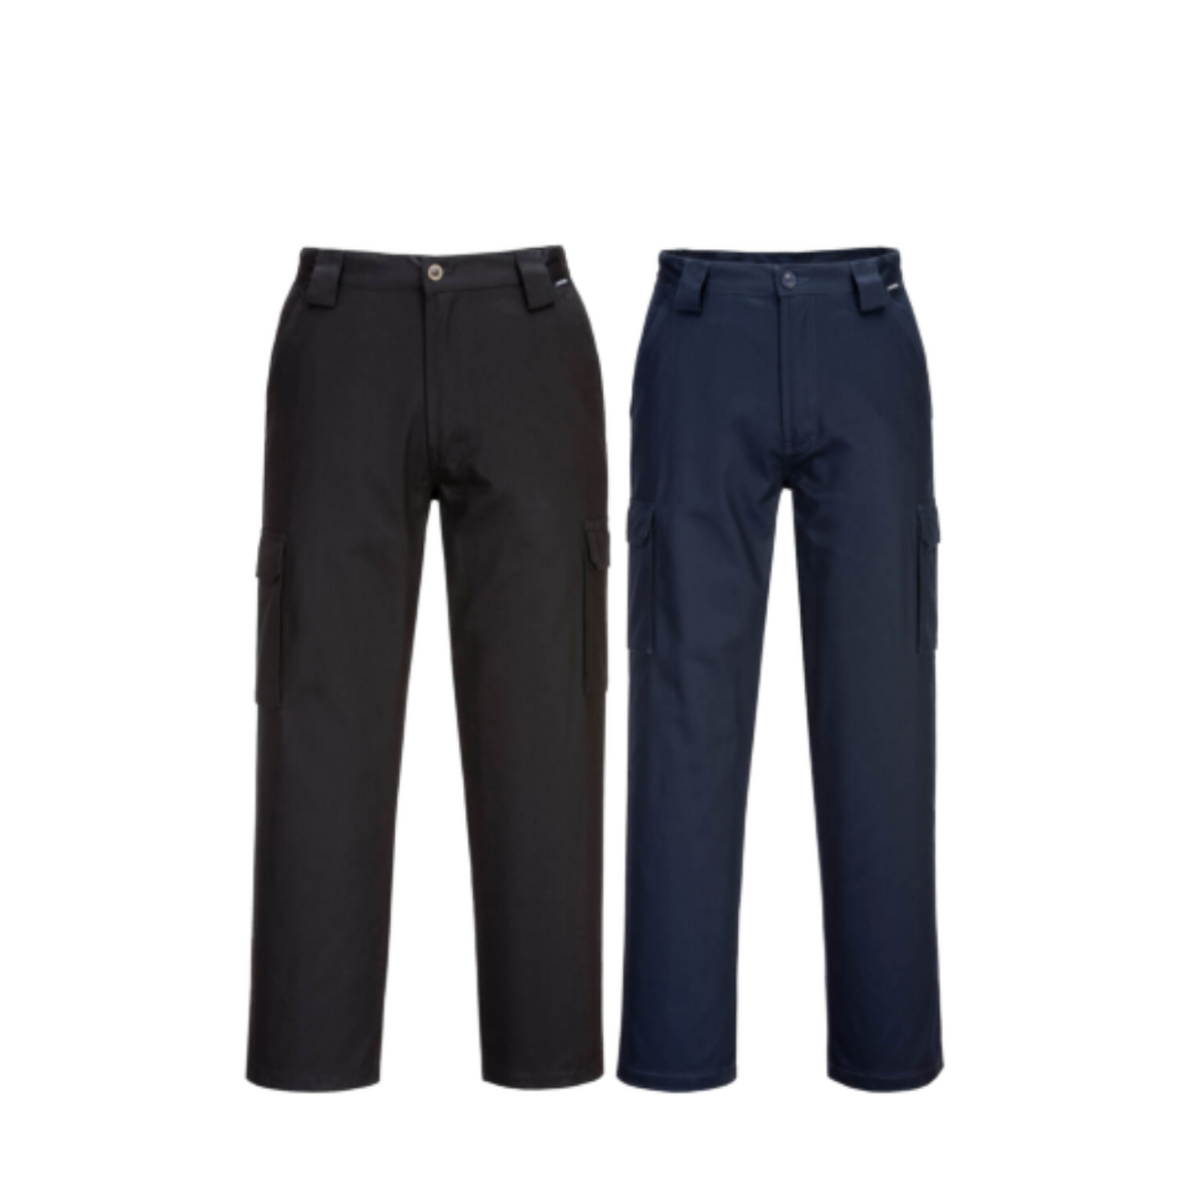 Portwest Mens Prime Mover Lightweight Cargo Pants Comfortable Work Safety MW70E-Collins Clothing Co